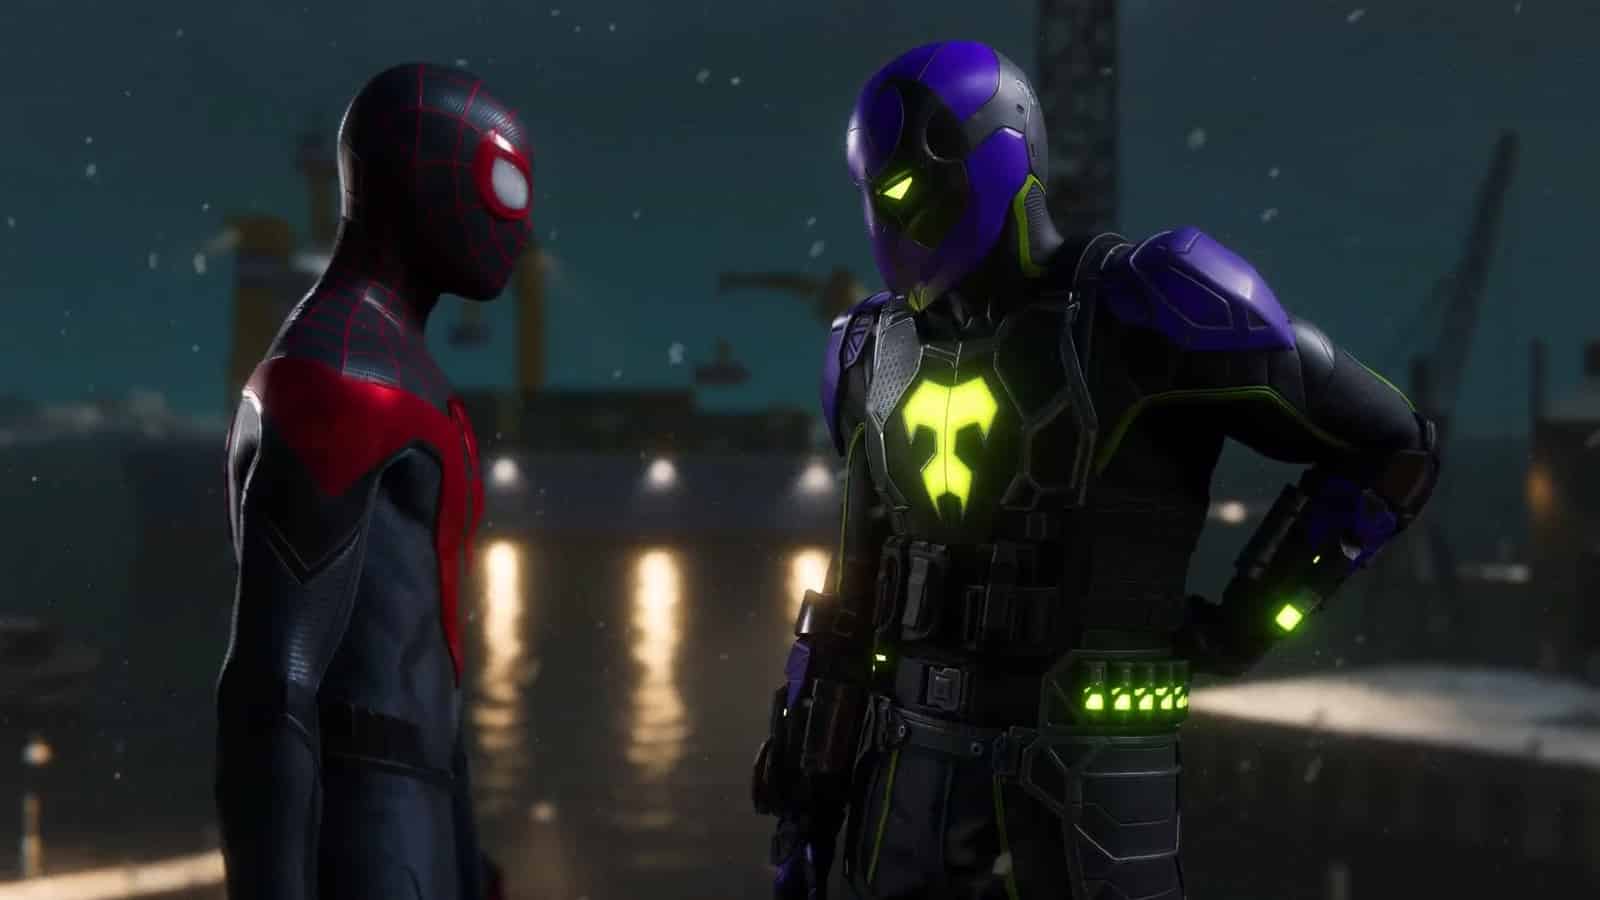 Finding miles. Miles morales Prowler. Prowler Miles morales Fortnite. Miles Gonzalo morales Prowler. Prowler Miles morales Earth 42.